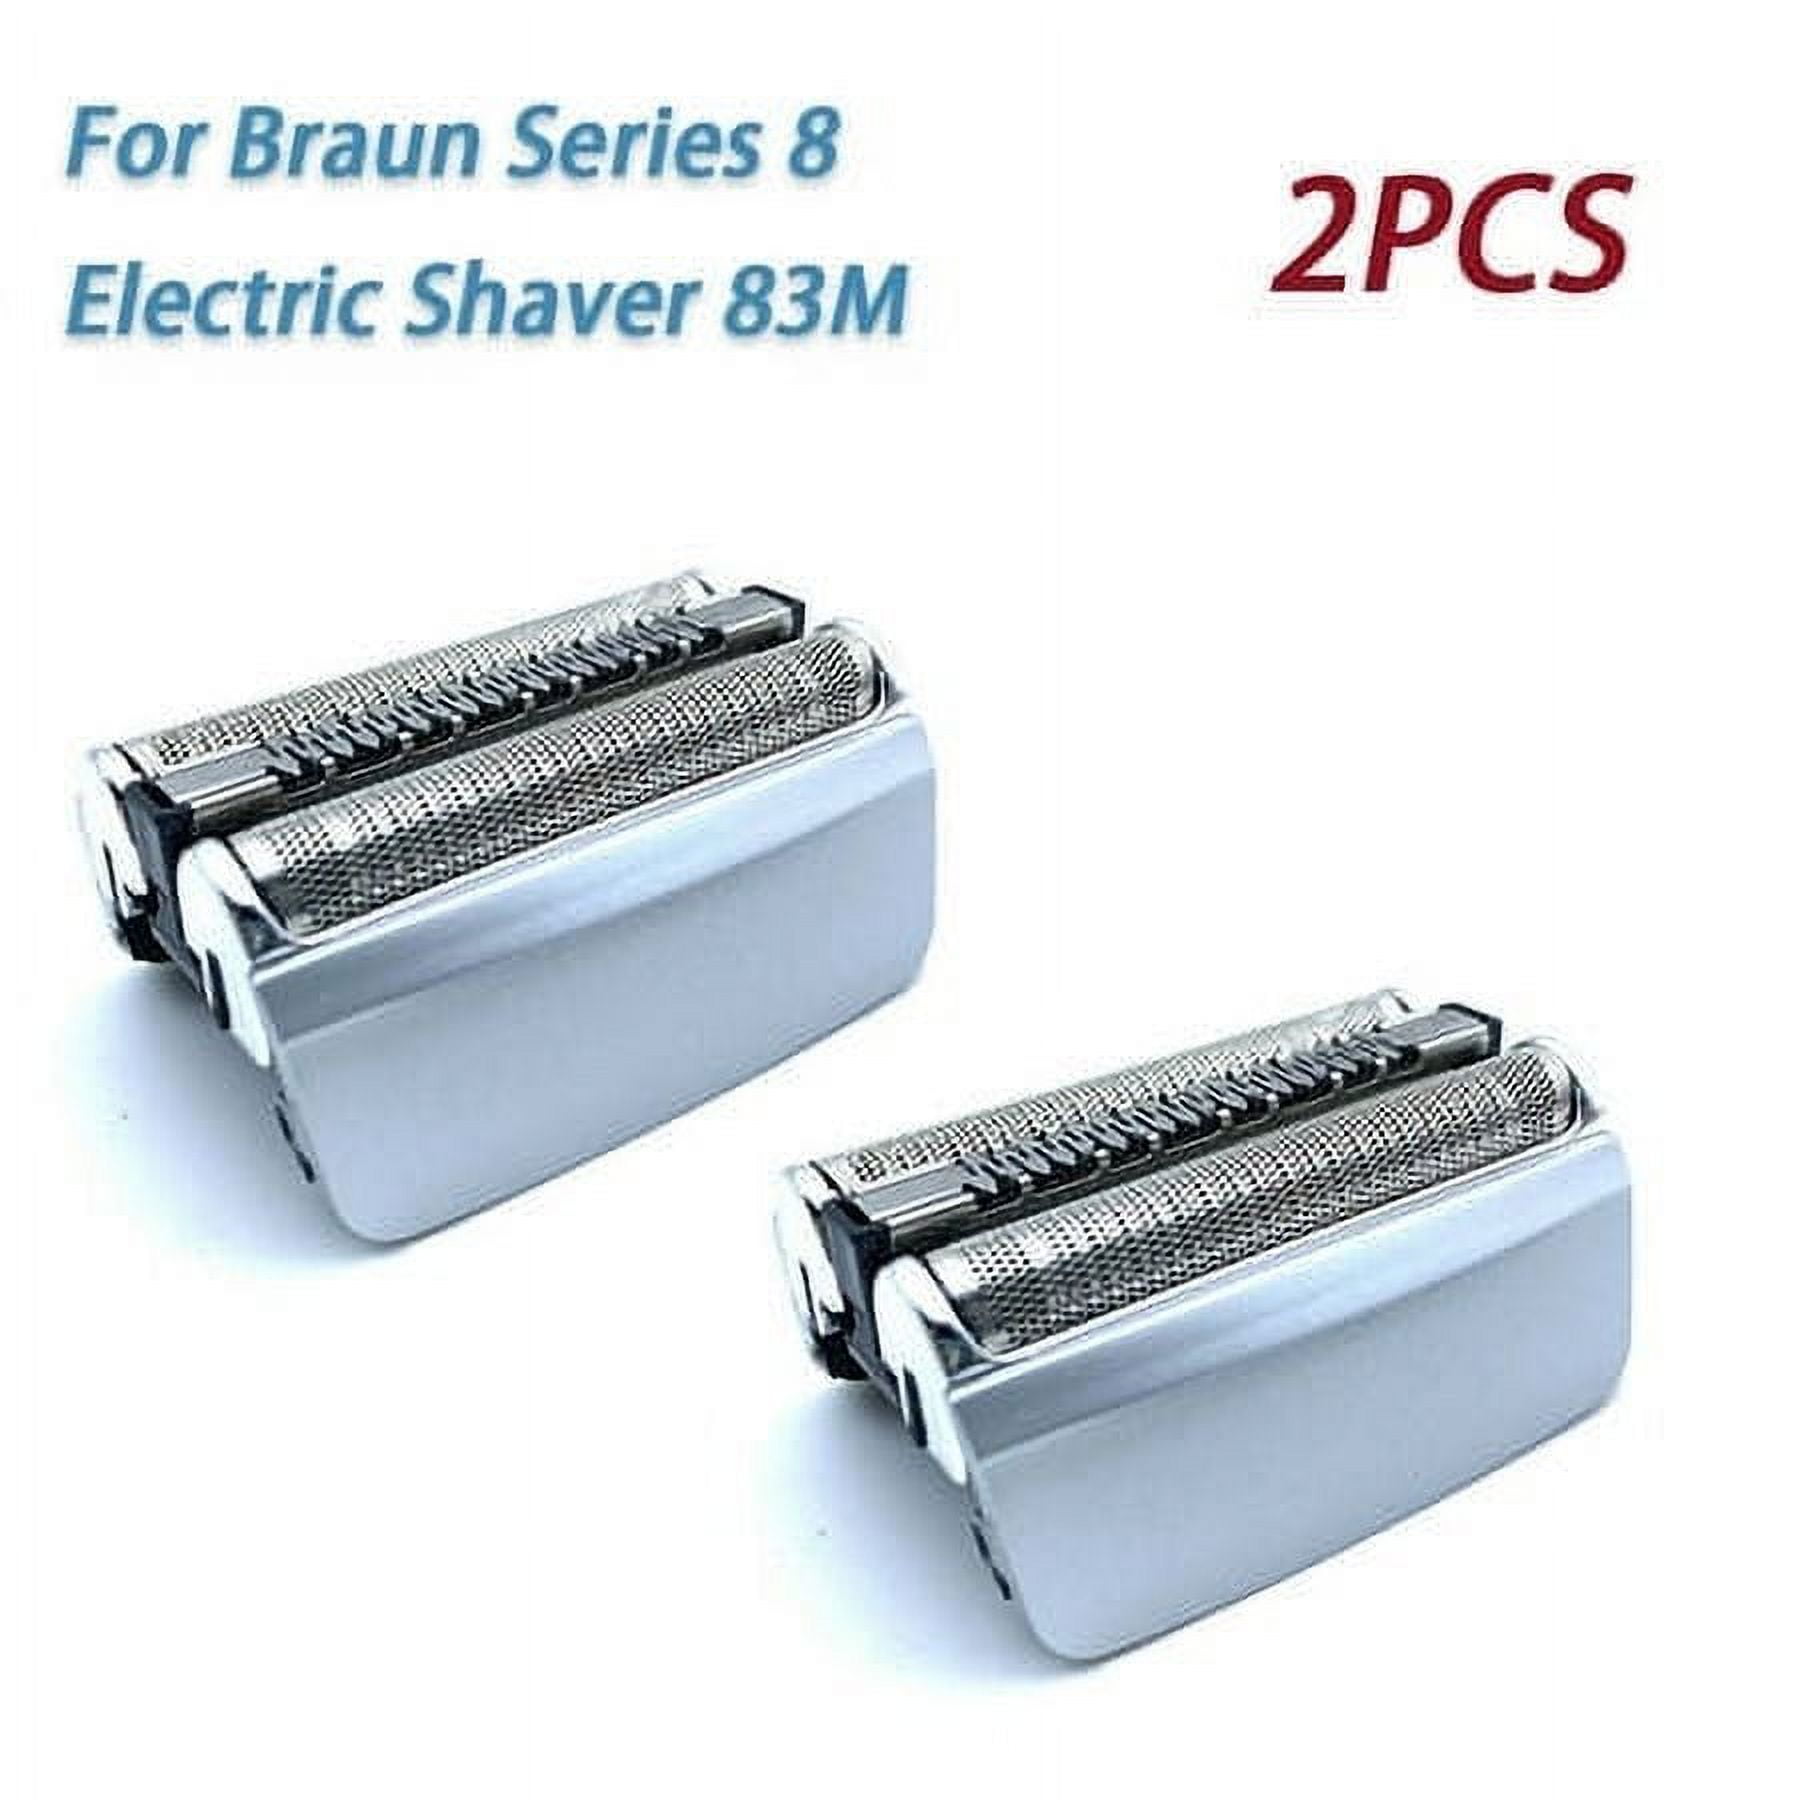 2x For Braun Series 8 shaver 83M Replacement Electric Shaver Heads